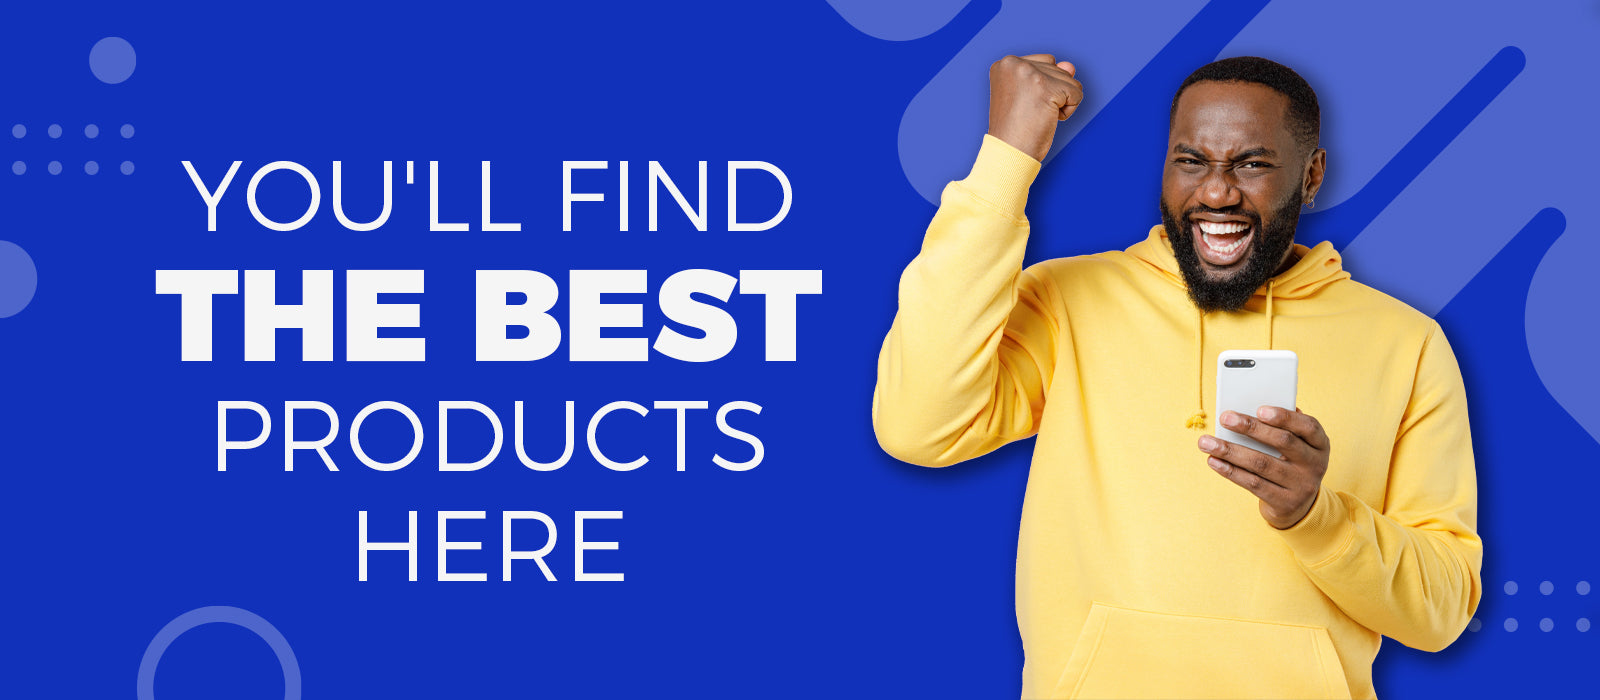 YOU'LL FIND THE BEST PRODUCTS HERE!